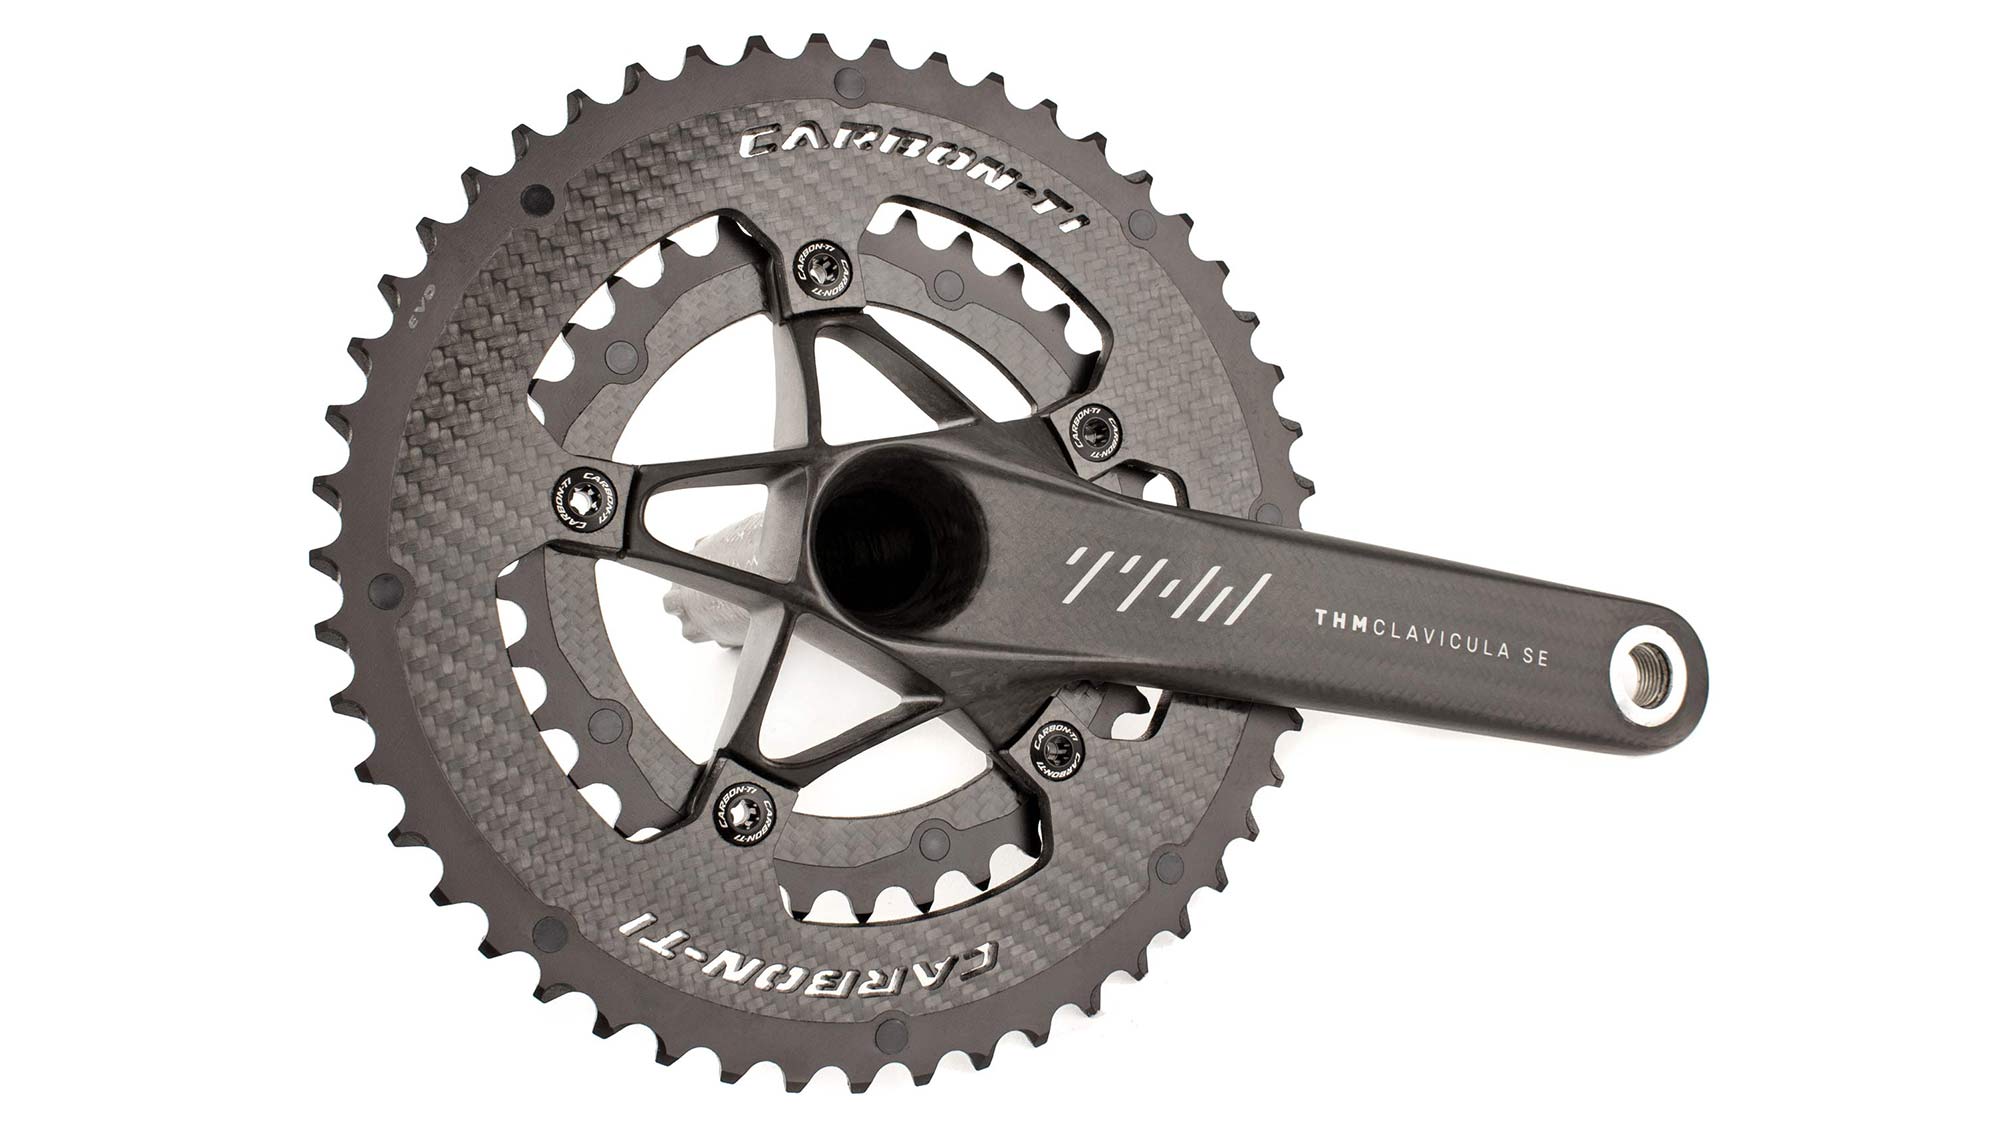 Carbon-Ti-X-Carboring-EVO-chainrings-for-Shimano-12-speed_5-bolt-110BCB-compact-50-34-on-THM-Clavicula-SE-cranks.jpg